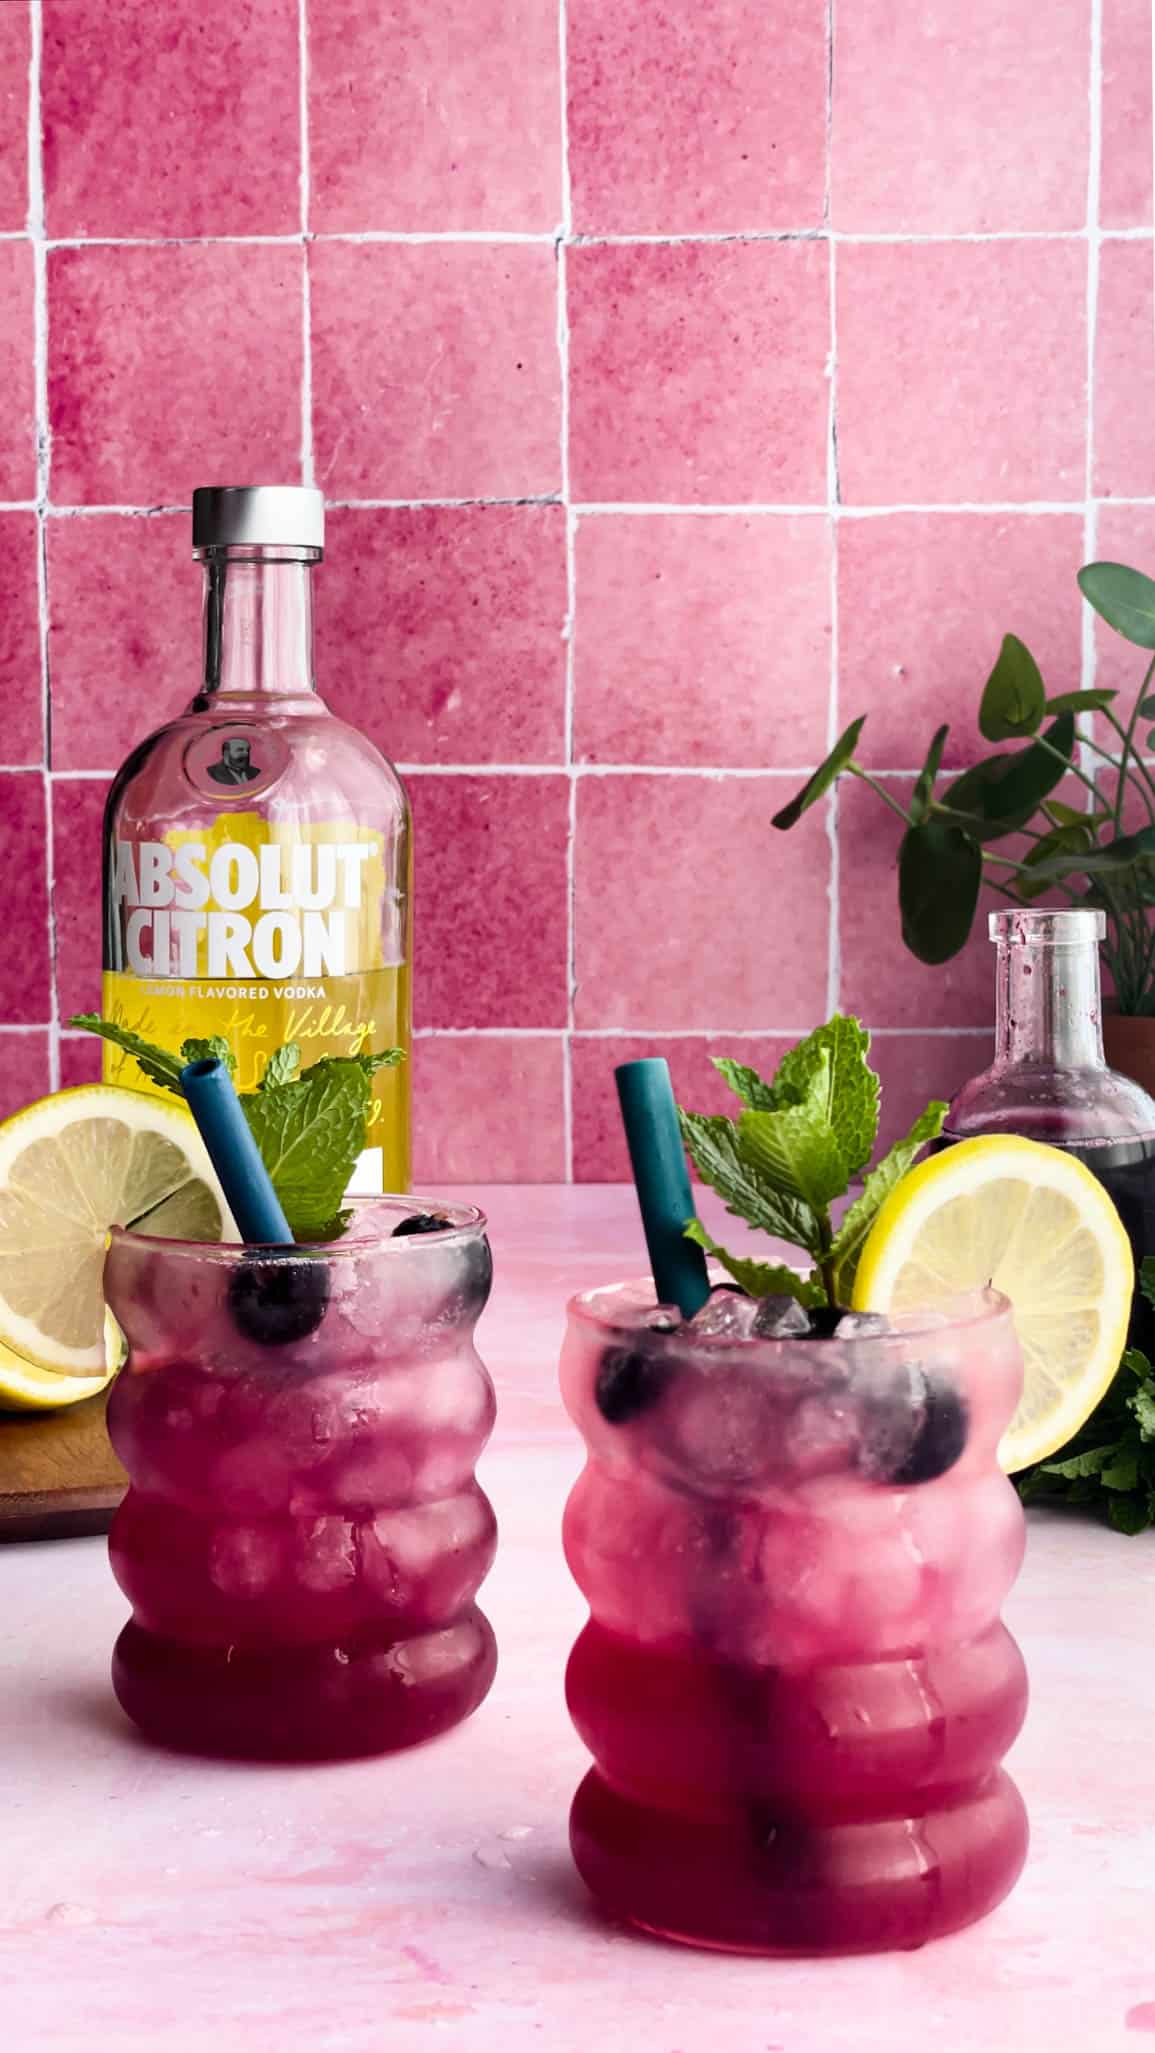 two sparkling blueberry vodka lemonade cocktails sit on a countertop, with a bottle of Absolute Citron in the background.